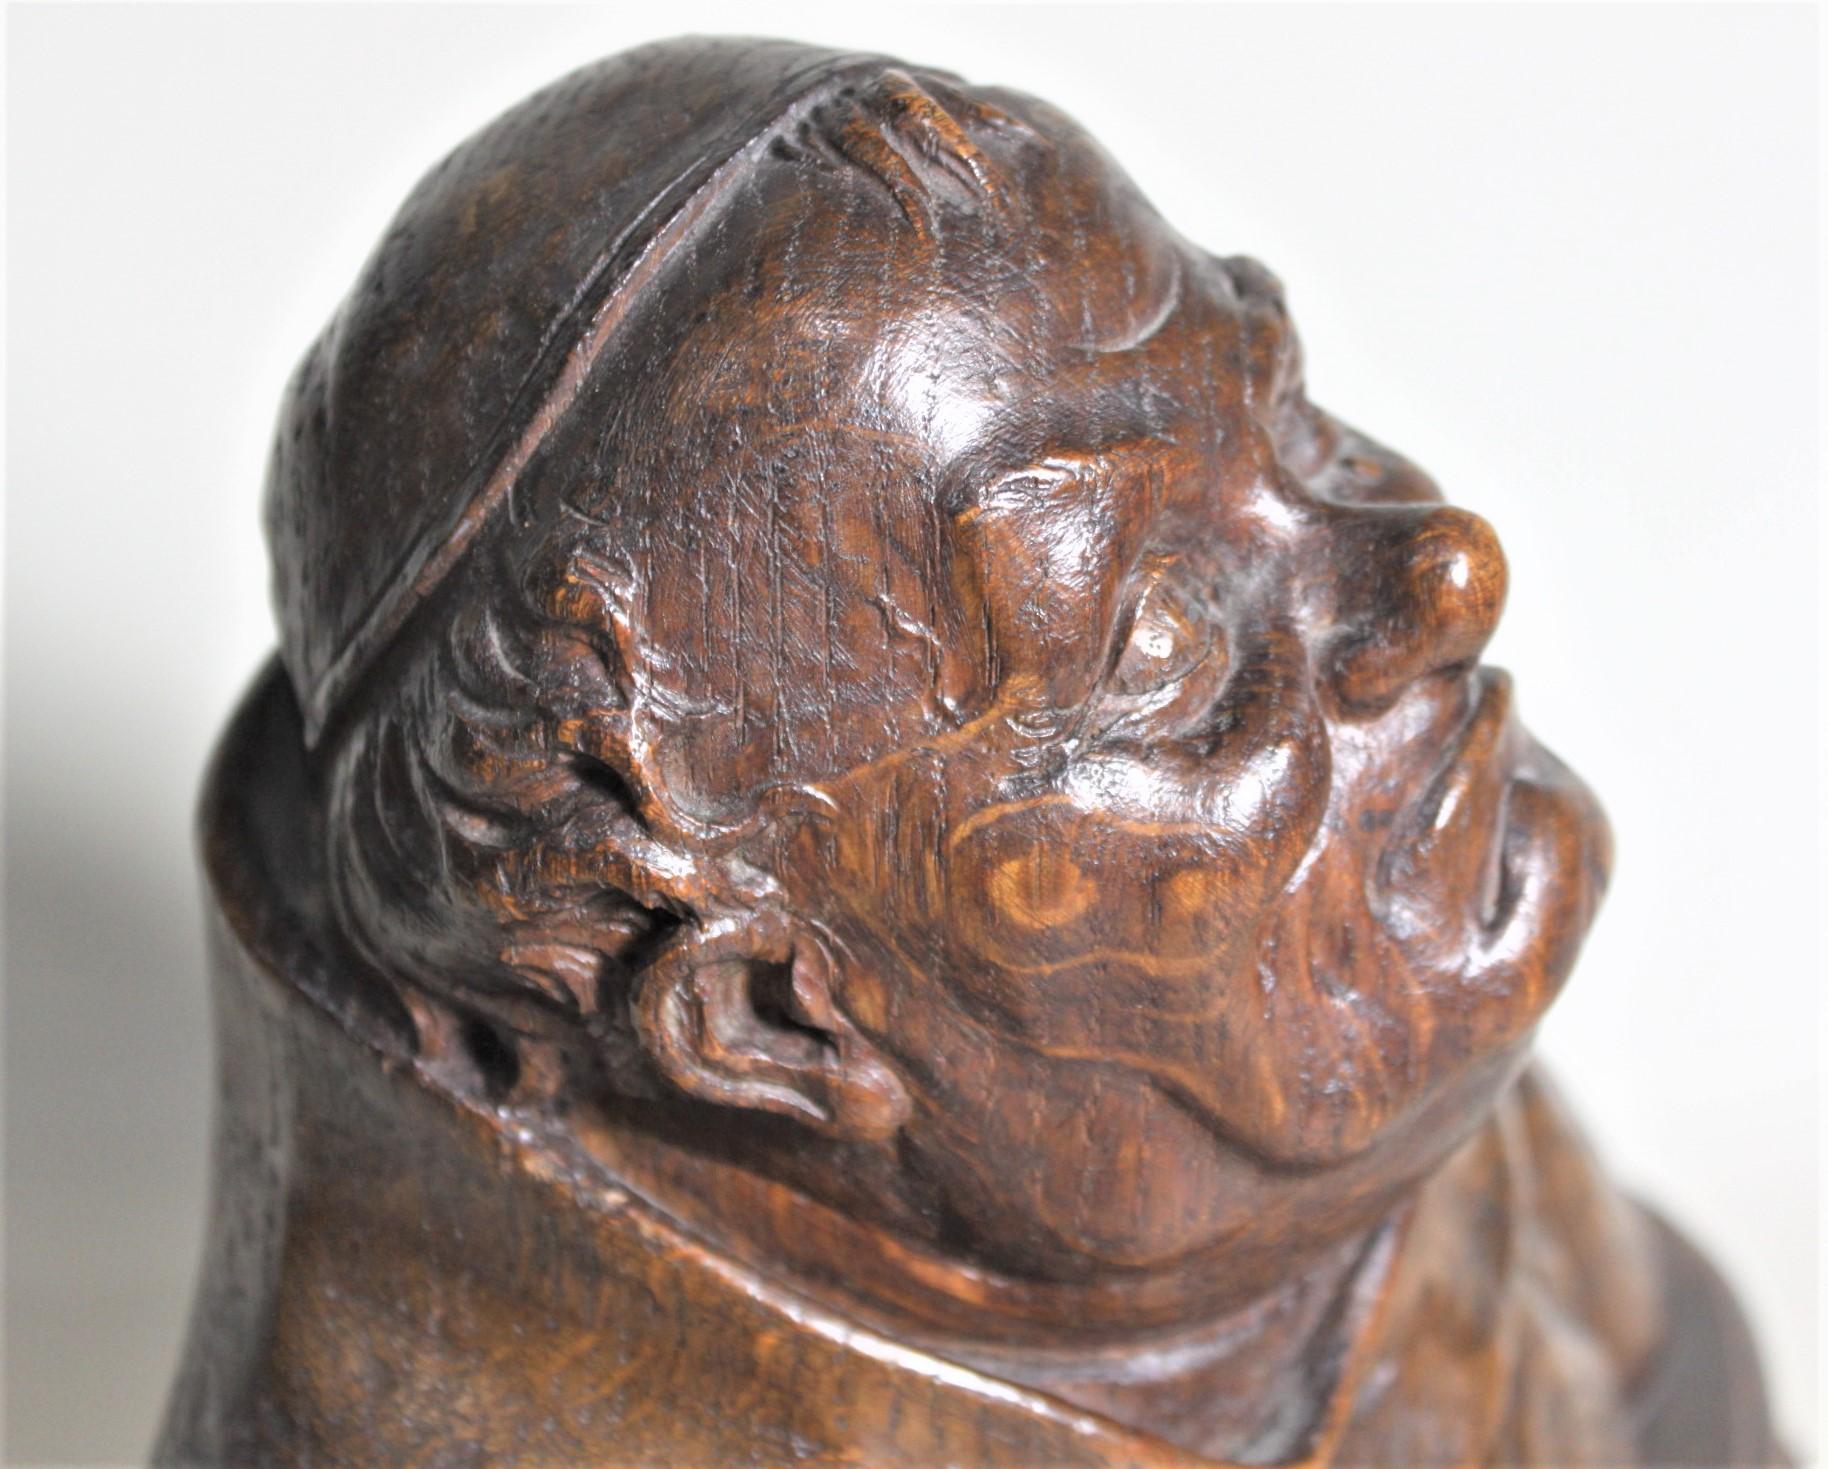 Antique Hand Carved Oak Wood Bust or Sculpture of a Religious Monk or Friar For Sale 4